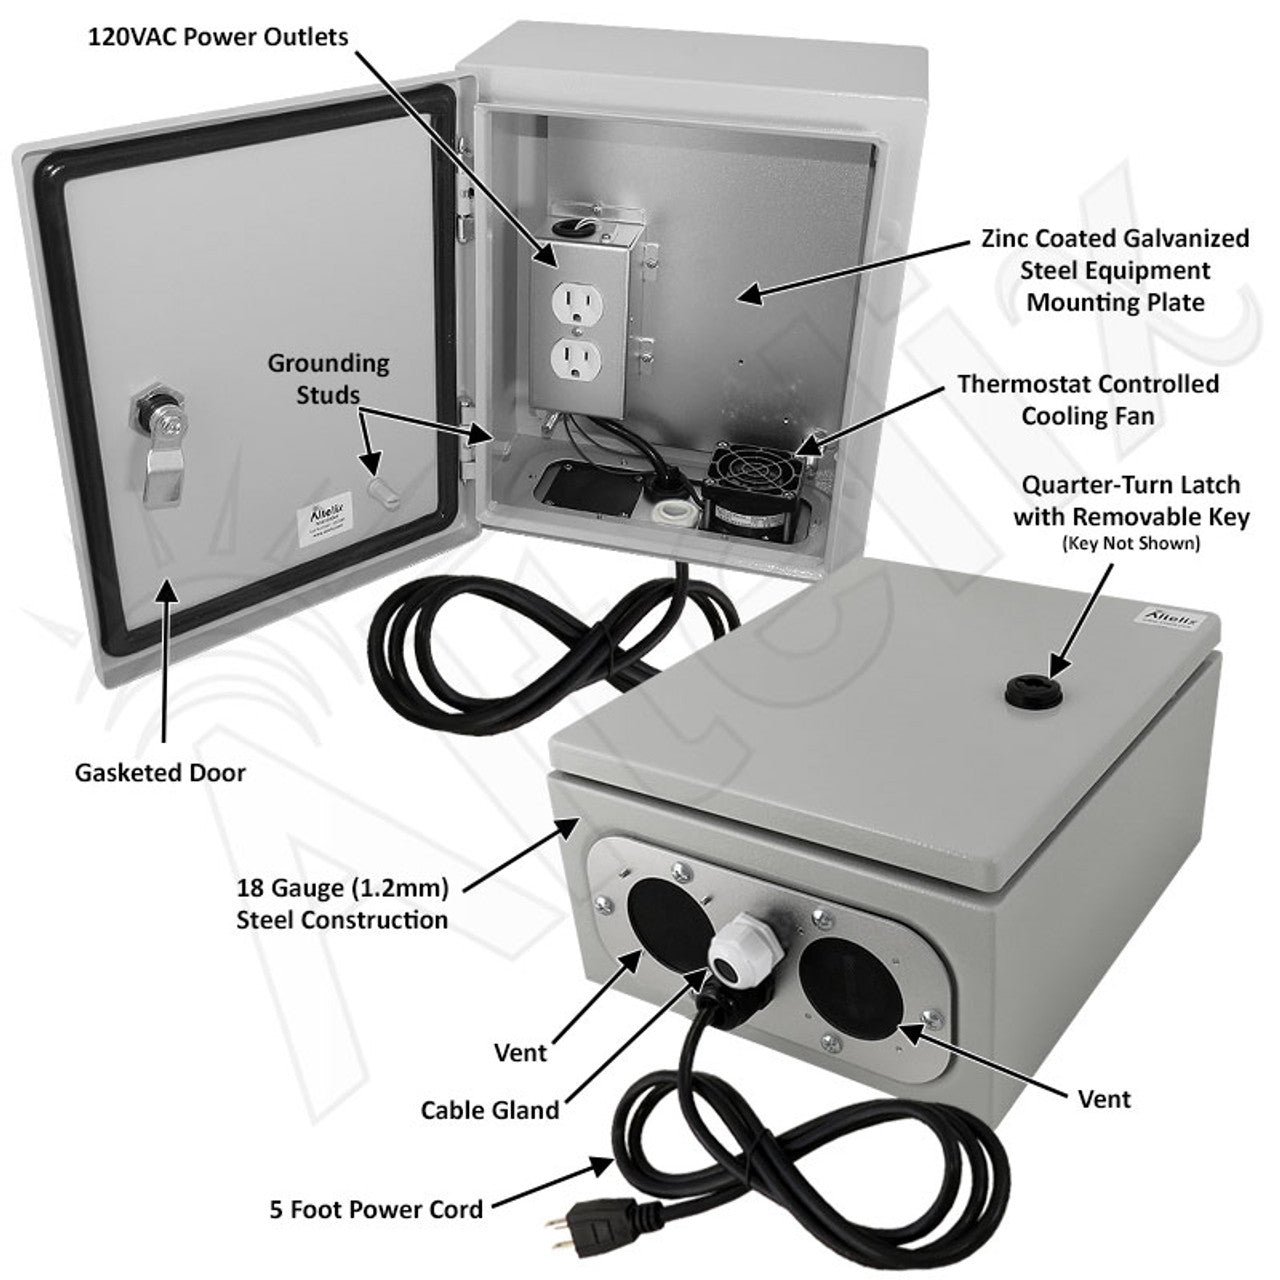 Altelix Steel Weatherproof NEMA Enclosure with Dual 120 VAC Duplex Outlets and Power Cord - 0